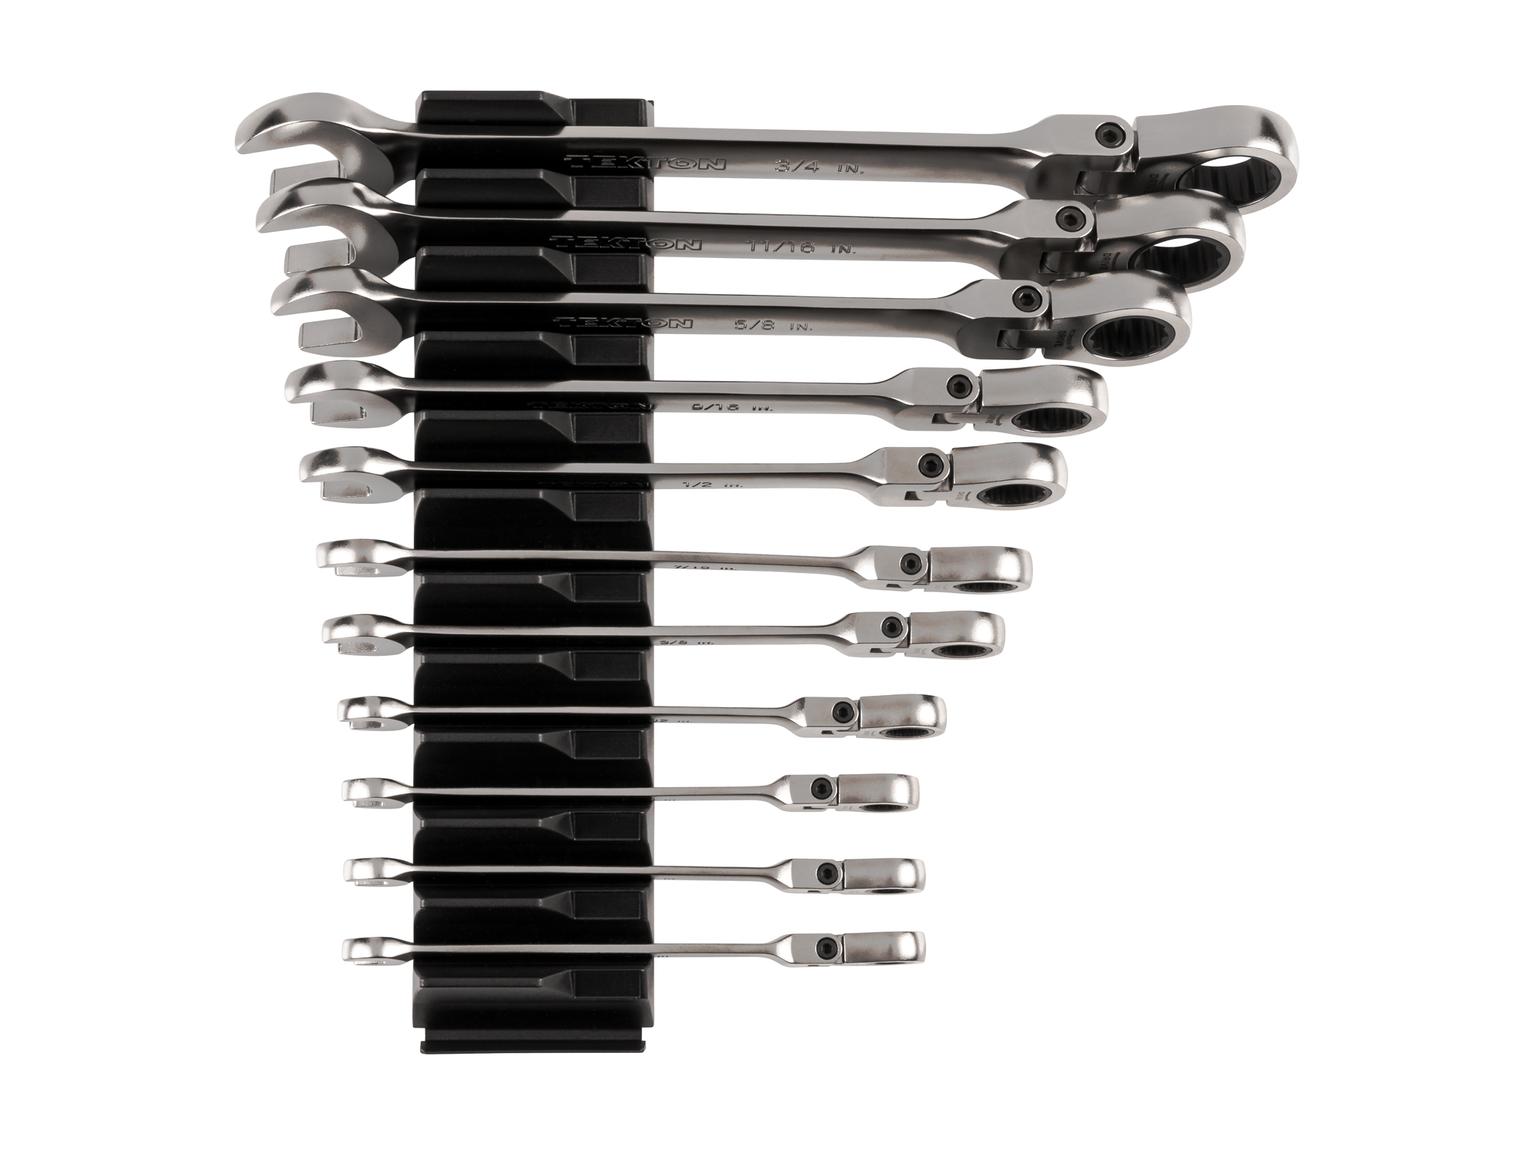 Flex Head 12-Point Ratcheting Combination Wrench Set, 11-Piece (Modular Slotted Organizer)